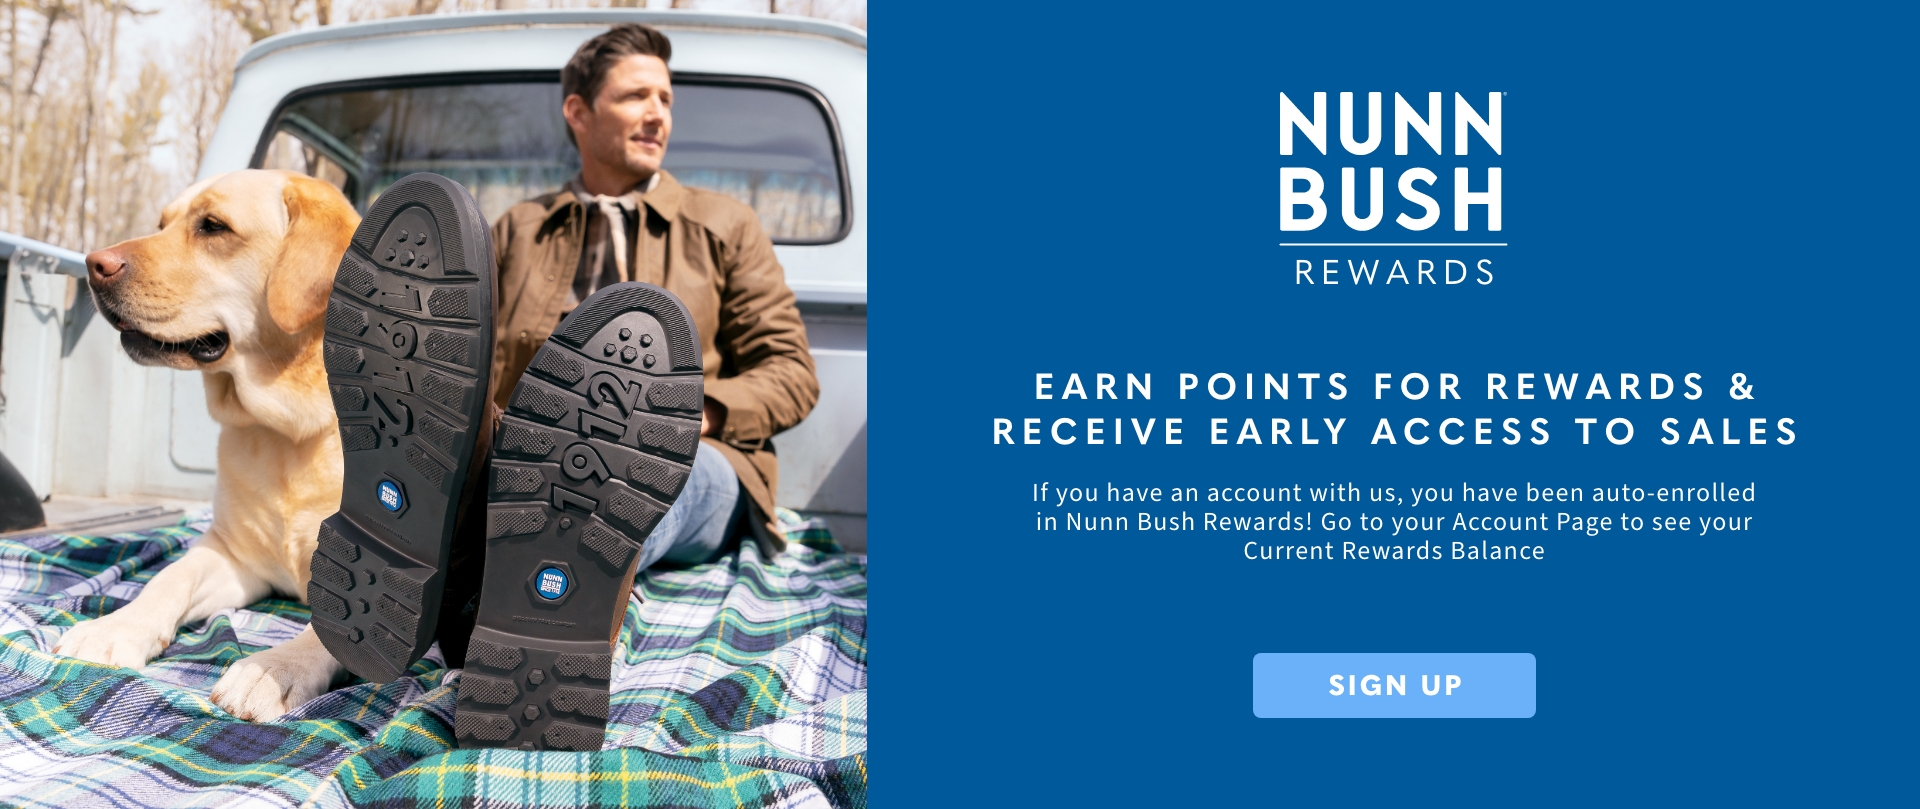 Earn points for rewards & receive early access to sales!